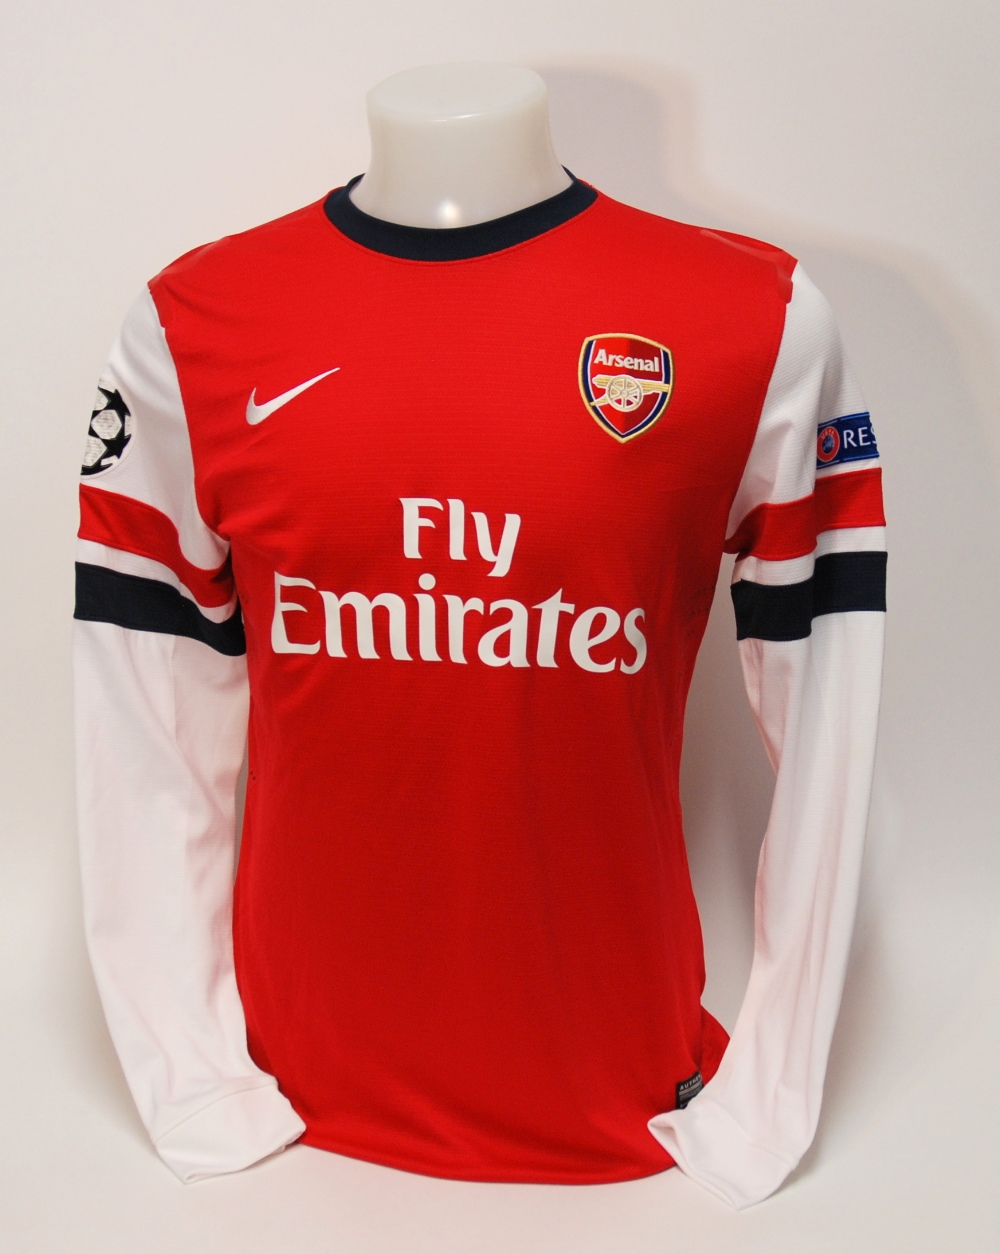 A red Arsenal shirt No.15, with crew-neck collar and embroidered cloth badge, inscribed Arsenal, the